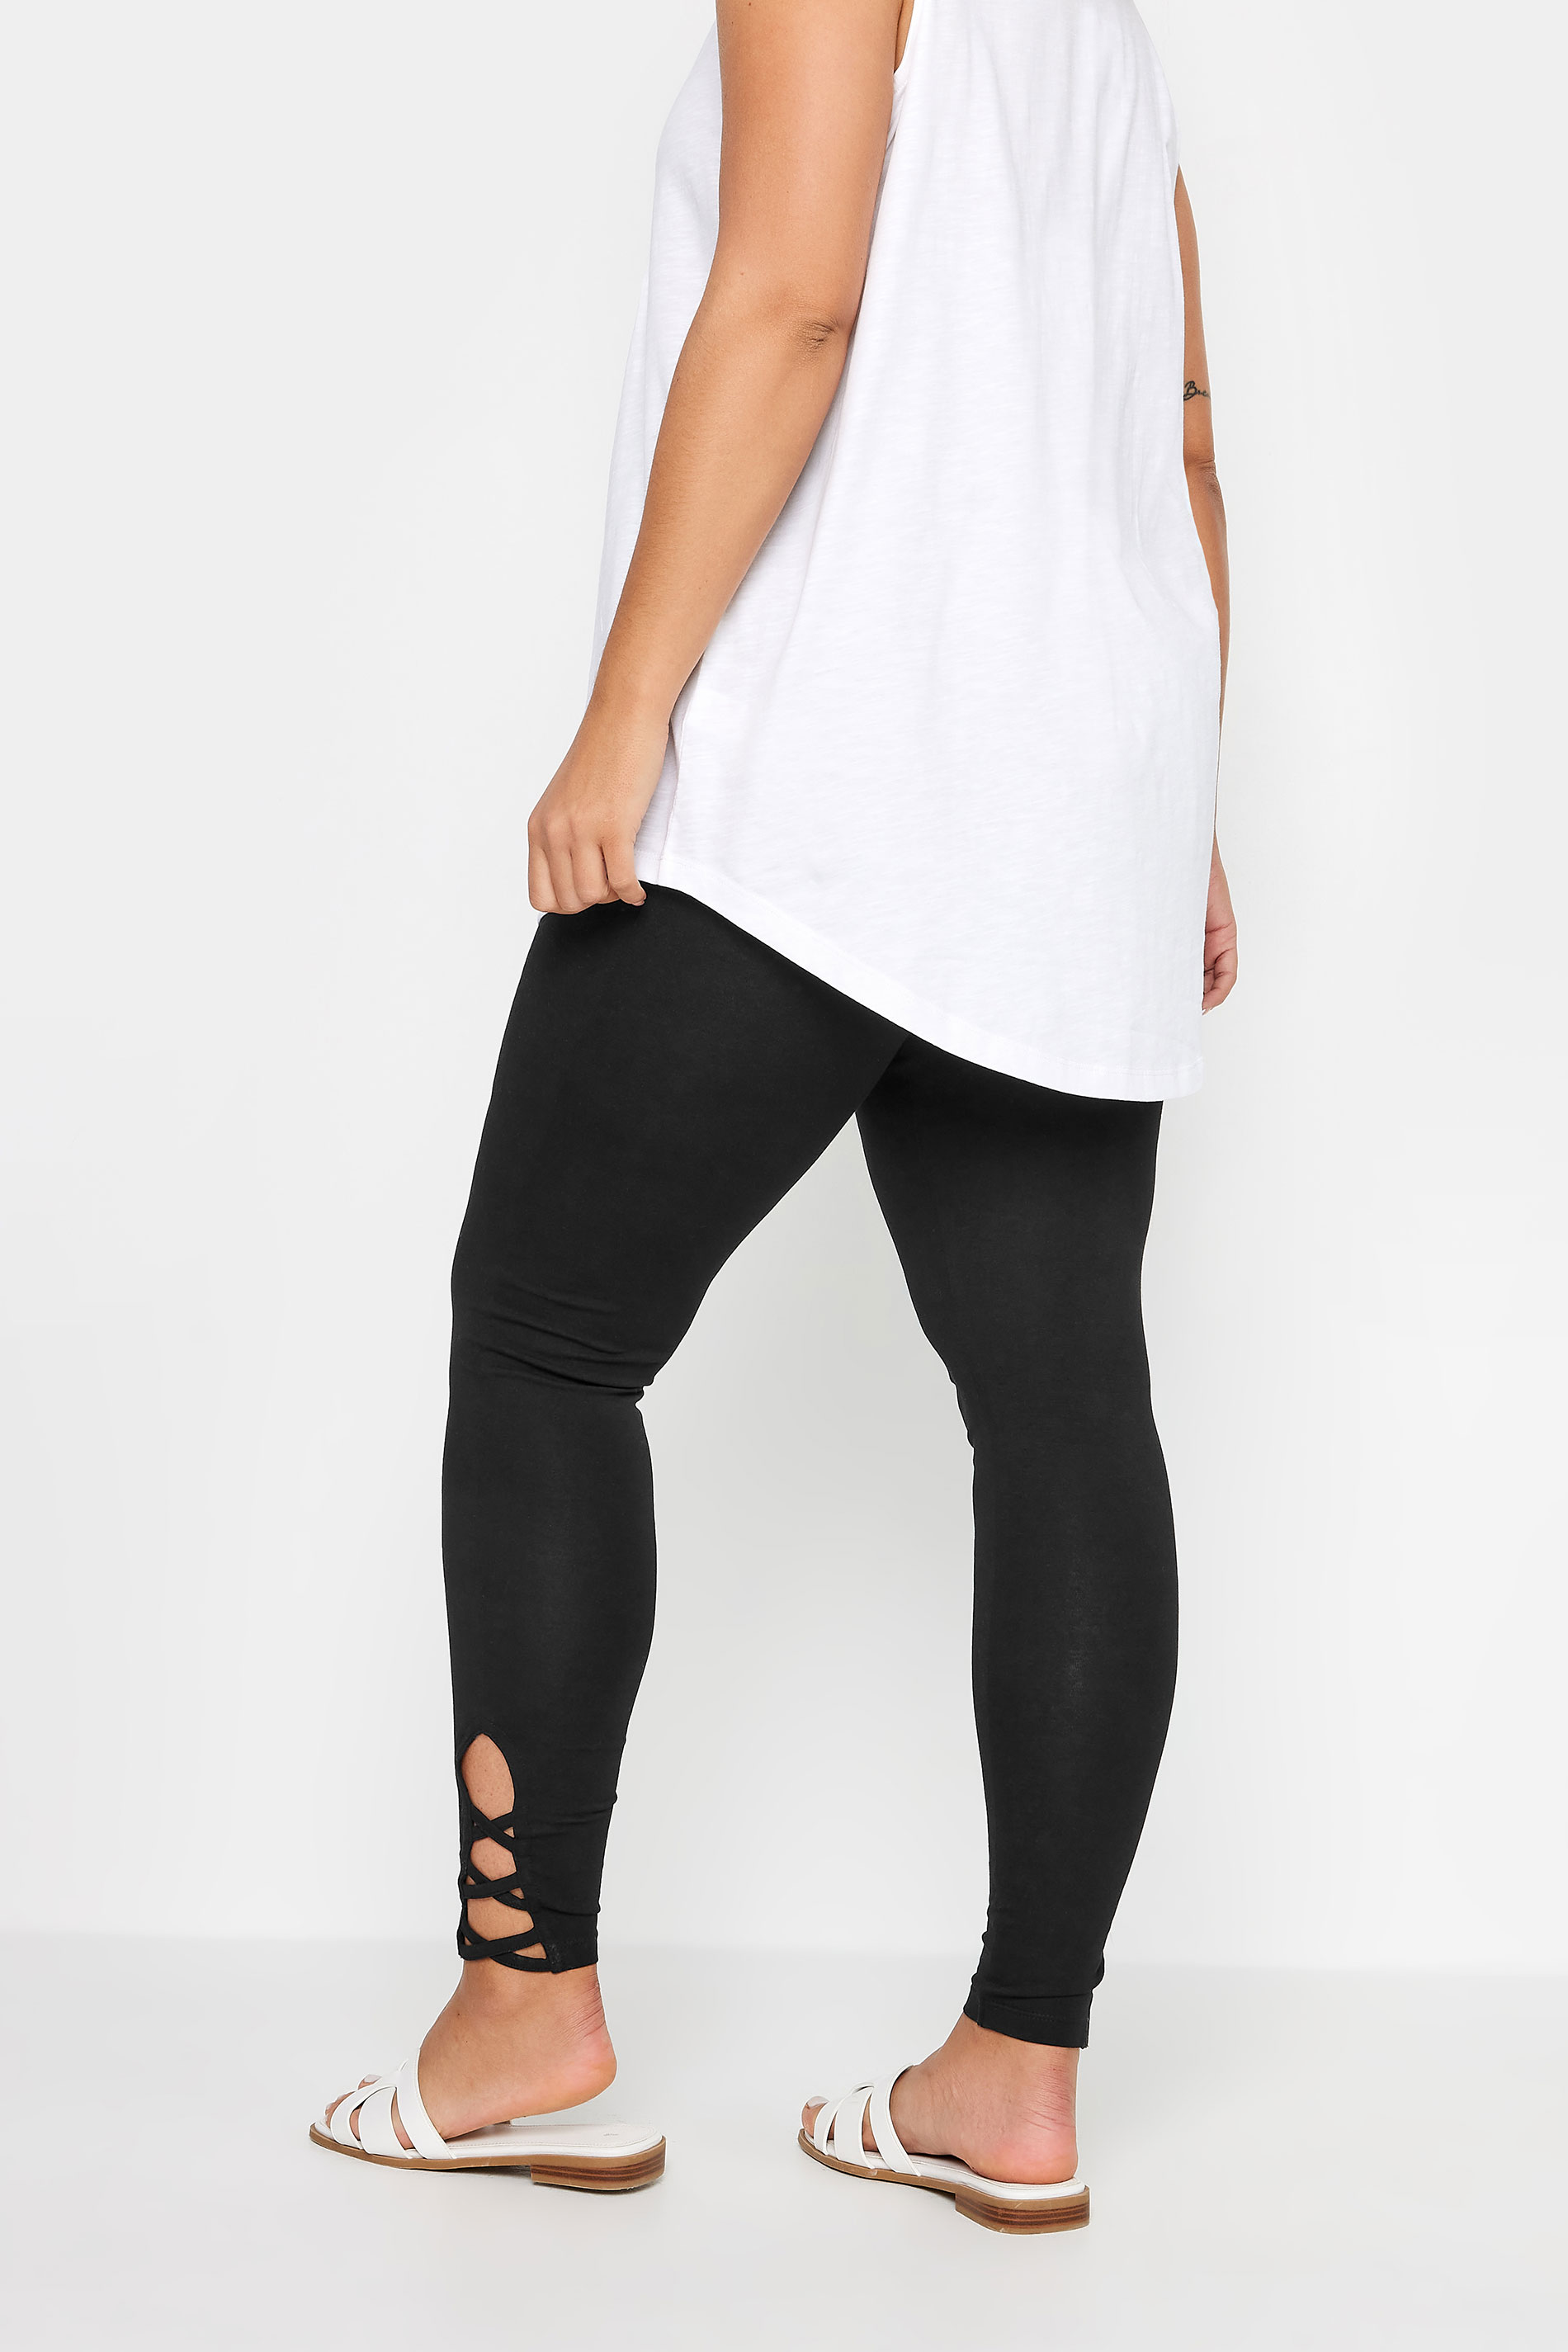 YOURS Plus Size Black Cut Out Leggings | Yours Clothing 3